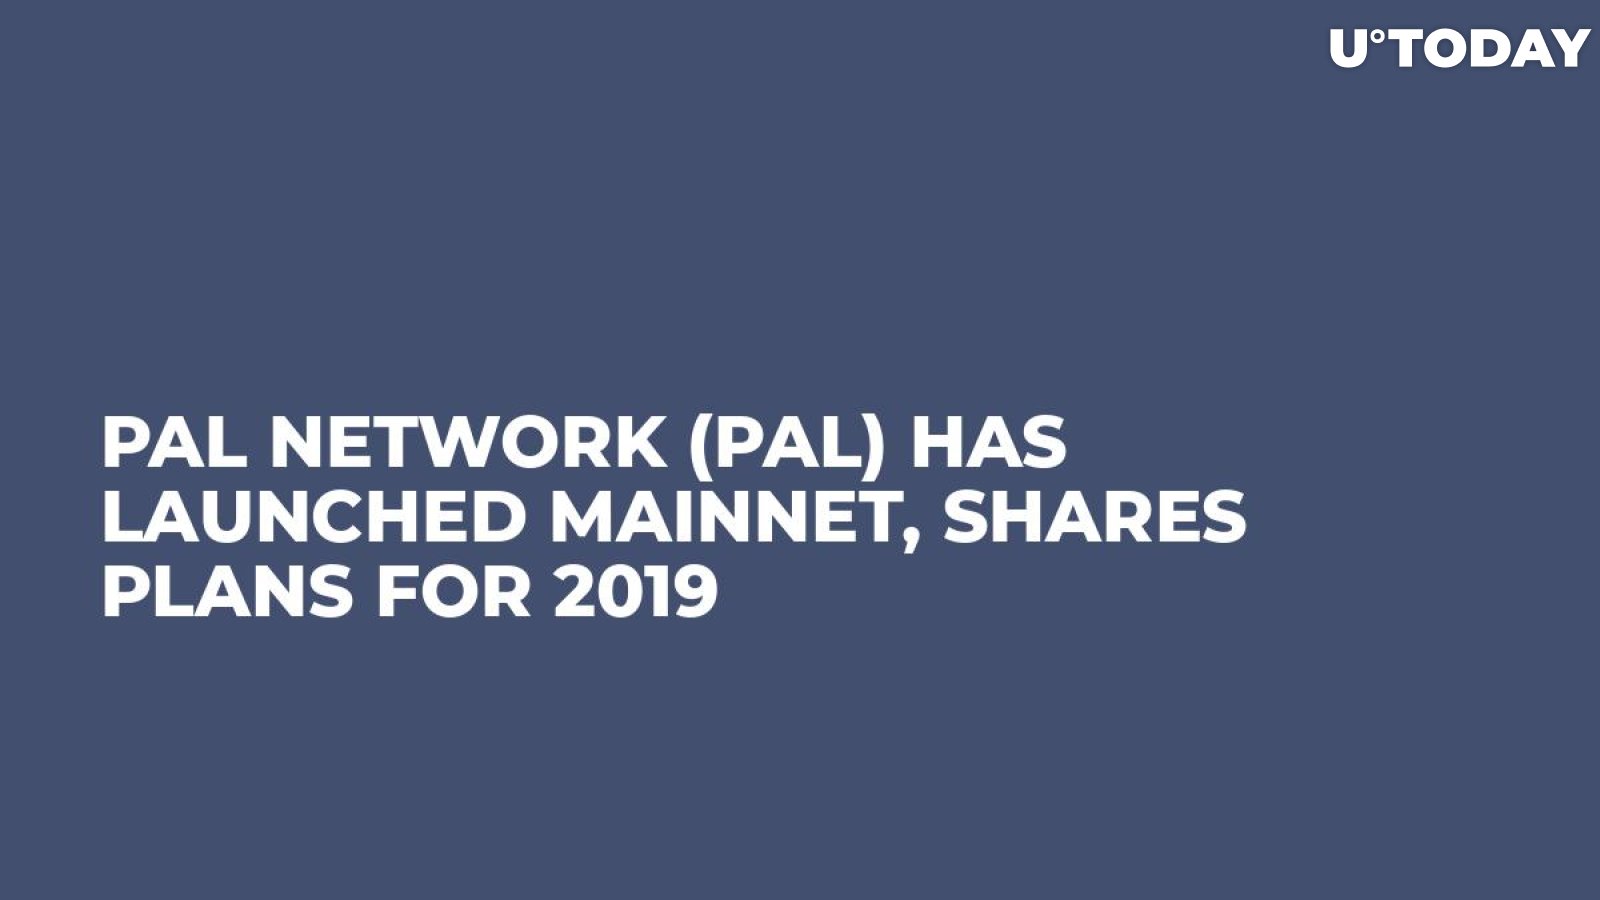 PAL Network (PAL) Has Launched Mainnet, Shares Plans for 2019